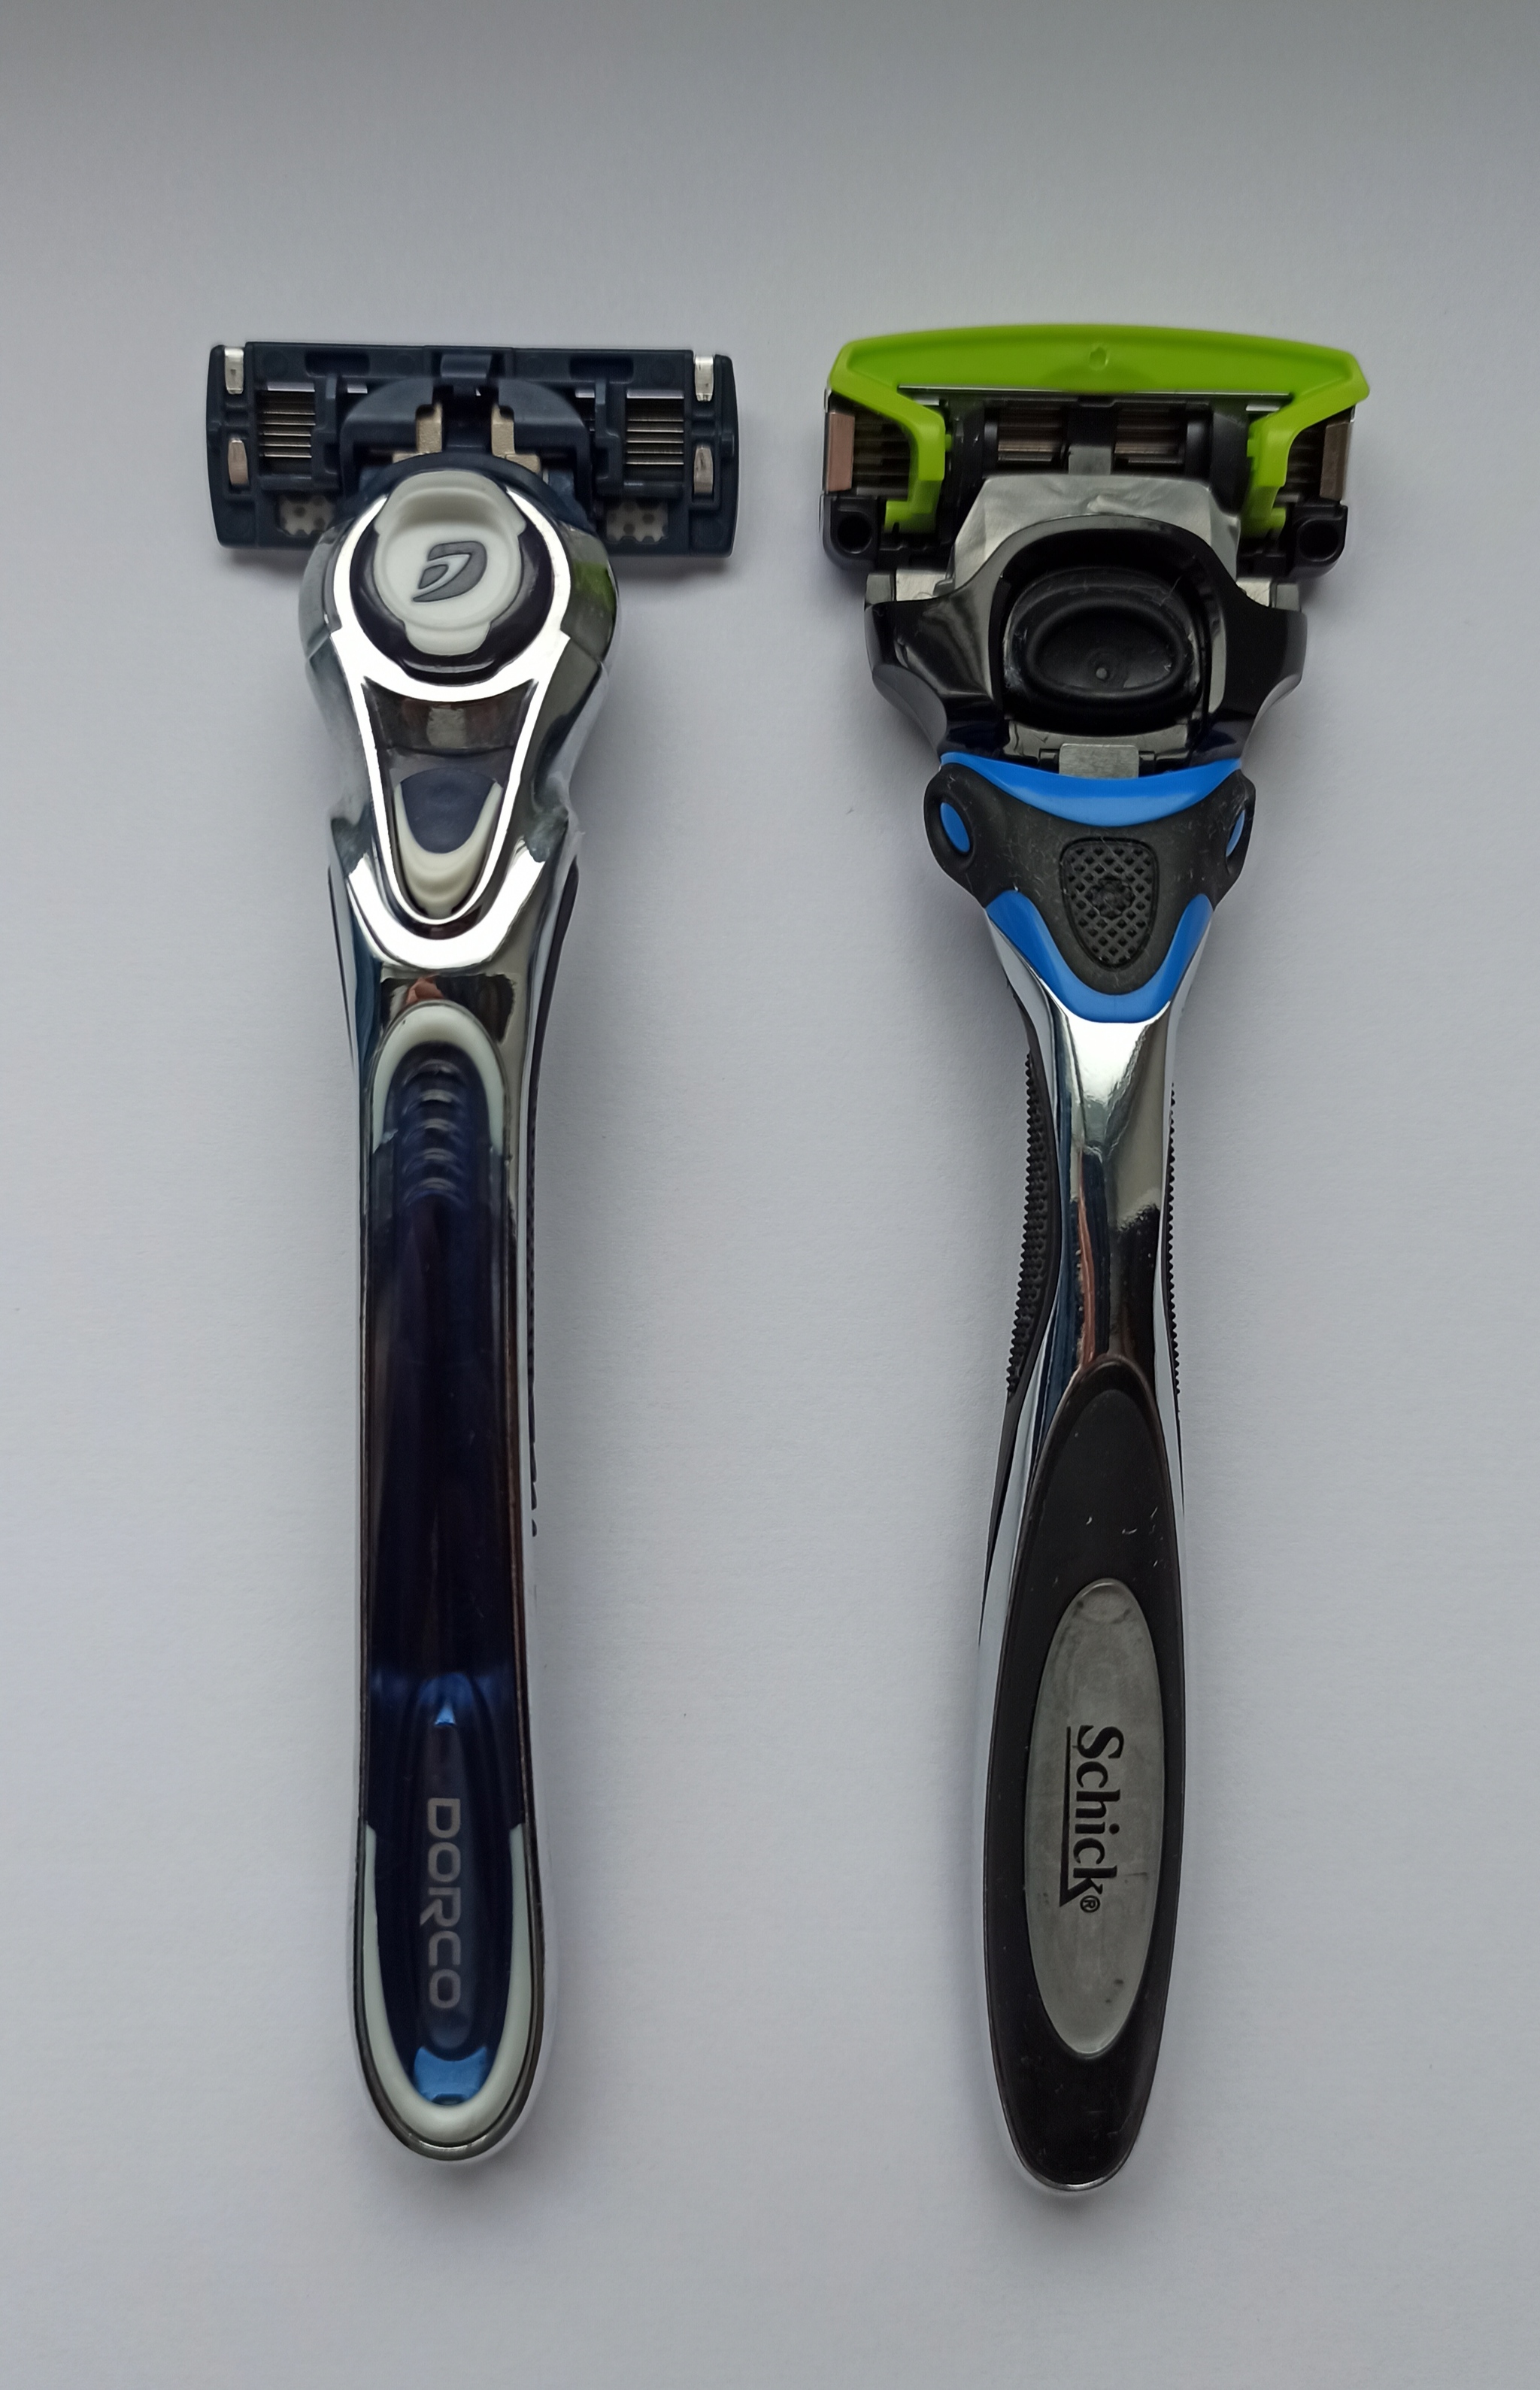  DORCO Pace Classic - Seven Blade Razor System with